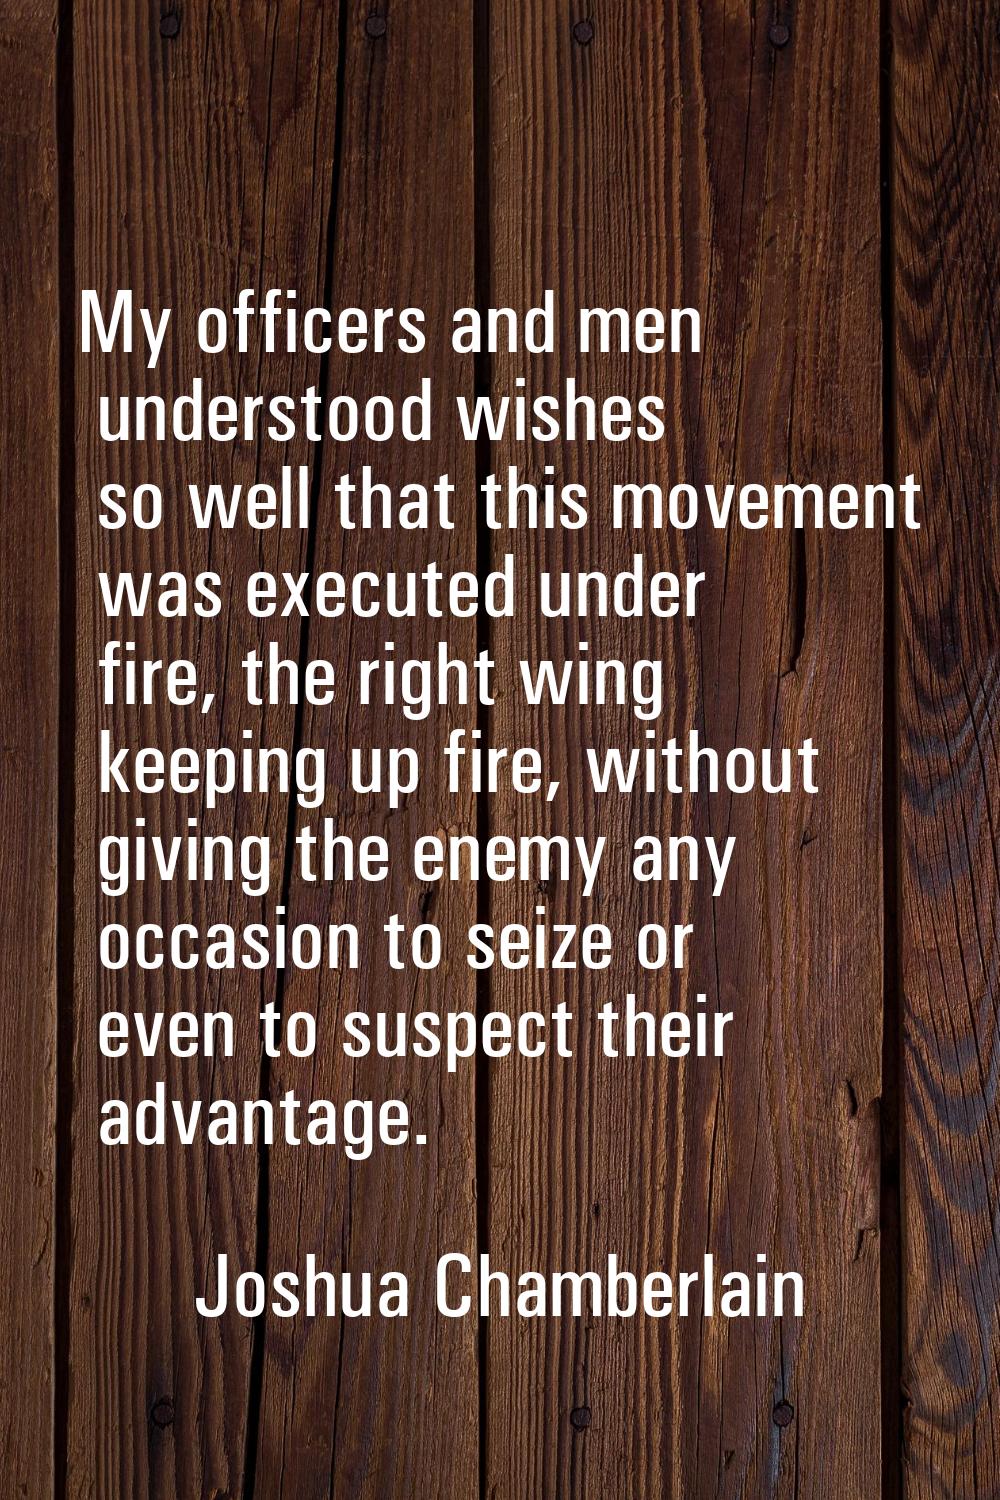 My officers and men understood wishes so well that this movement was executed under fire, the right